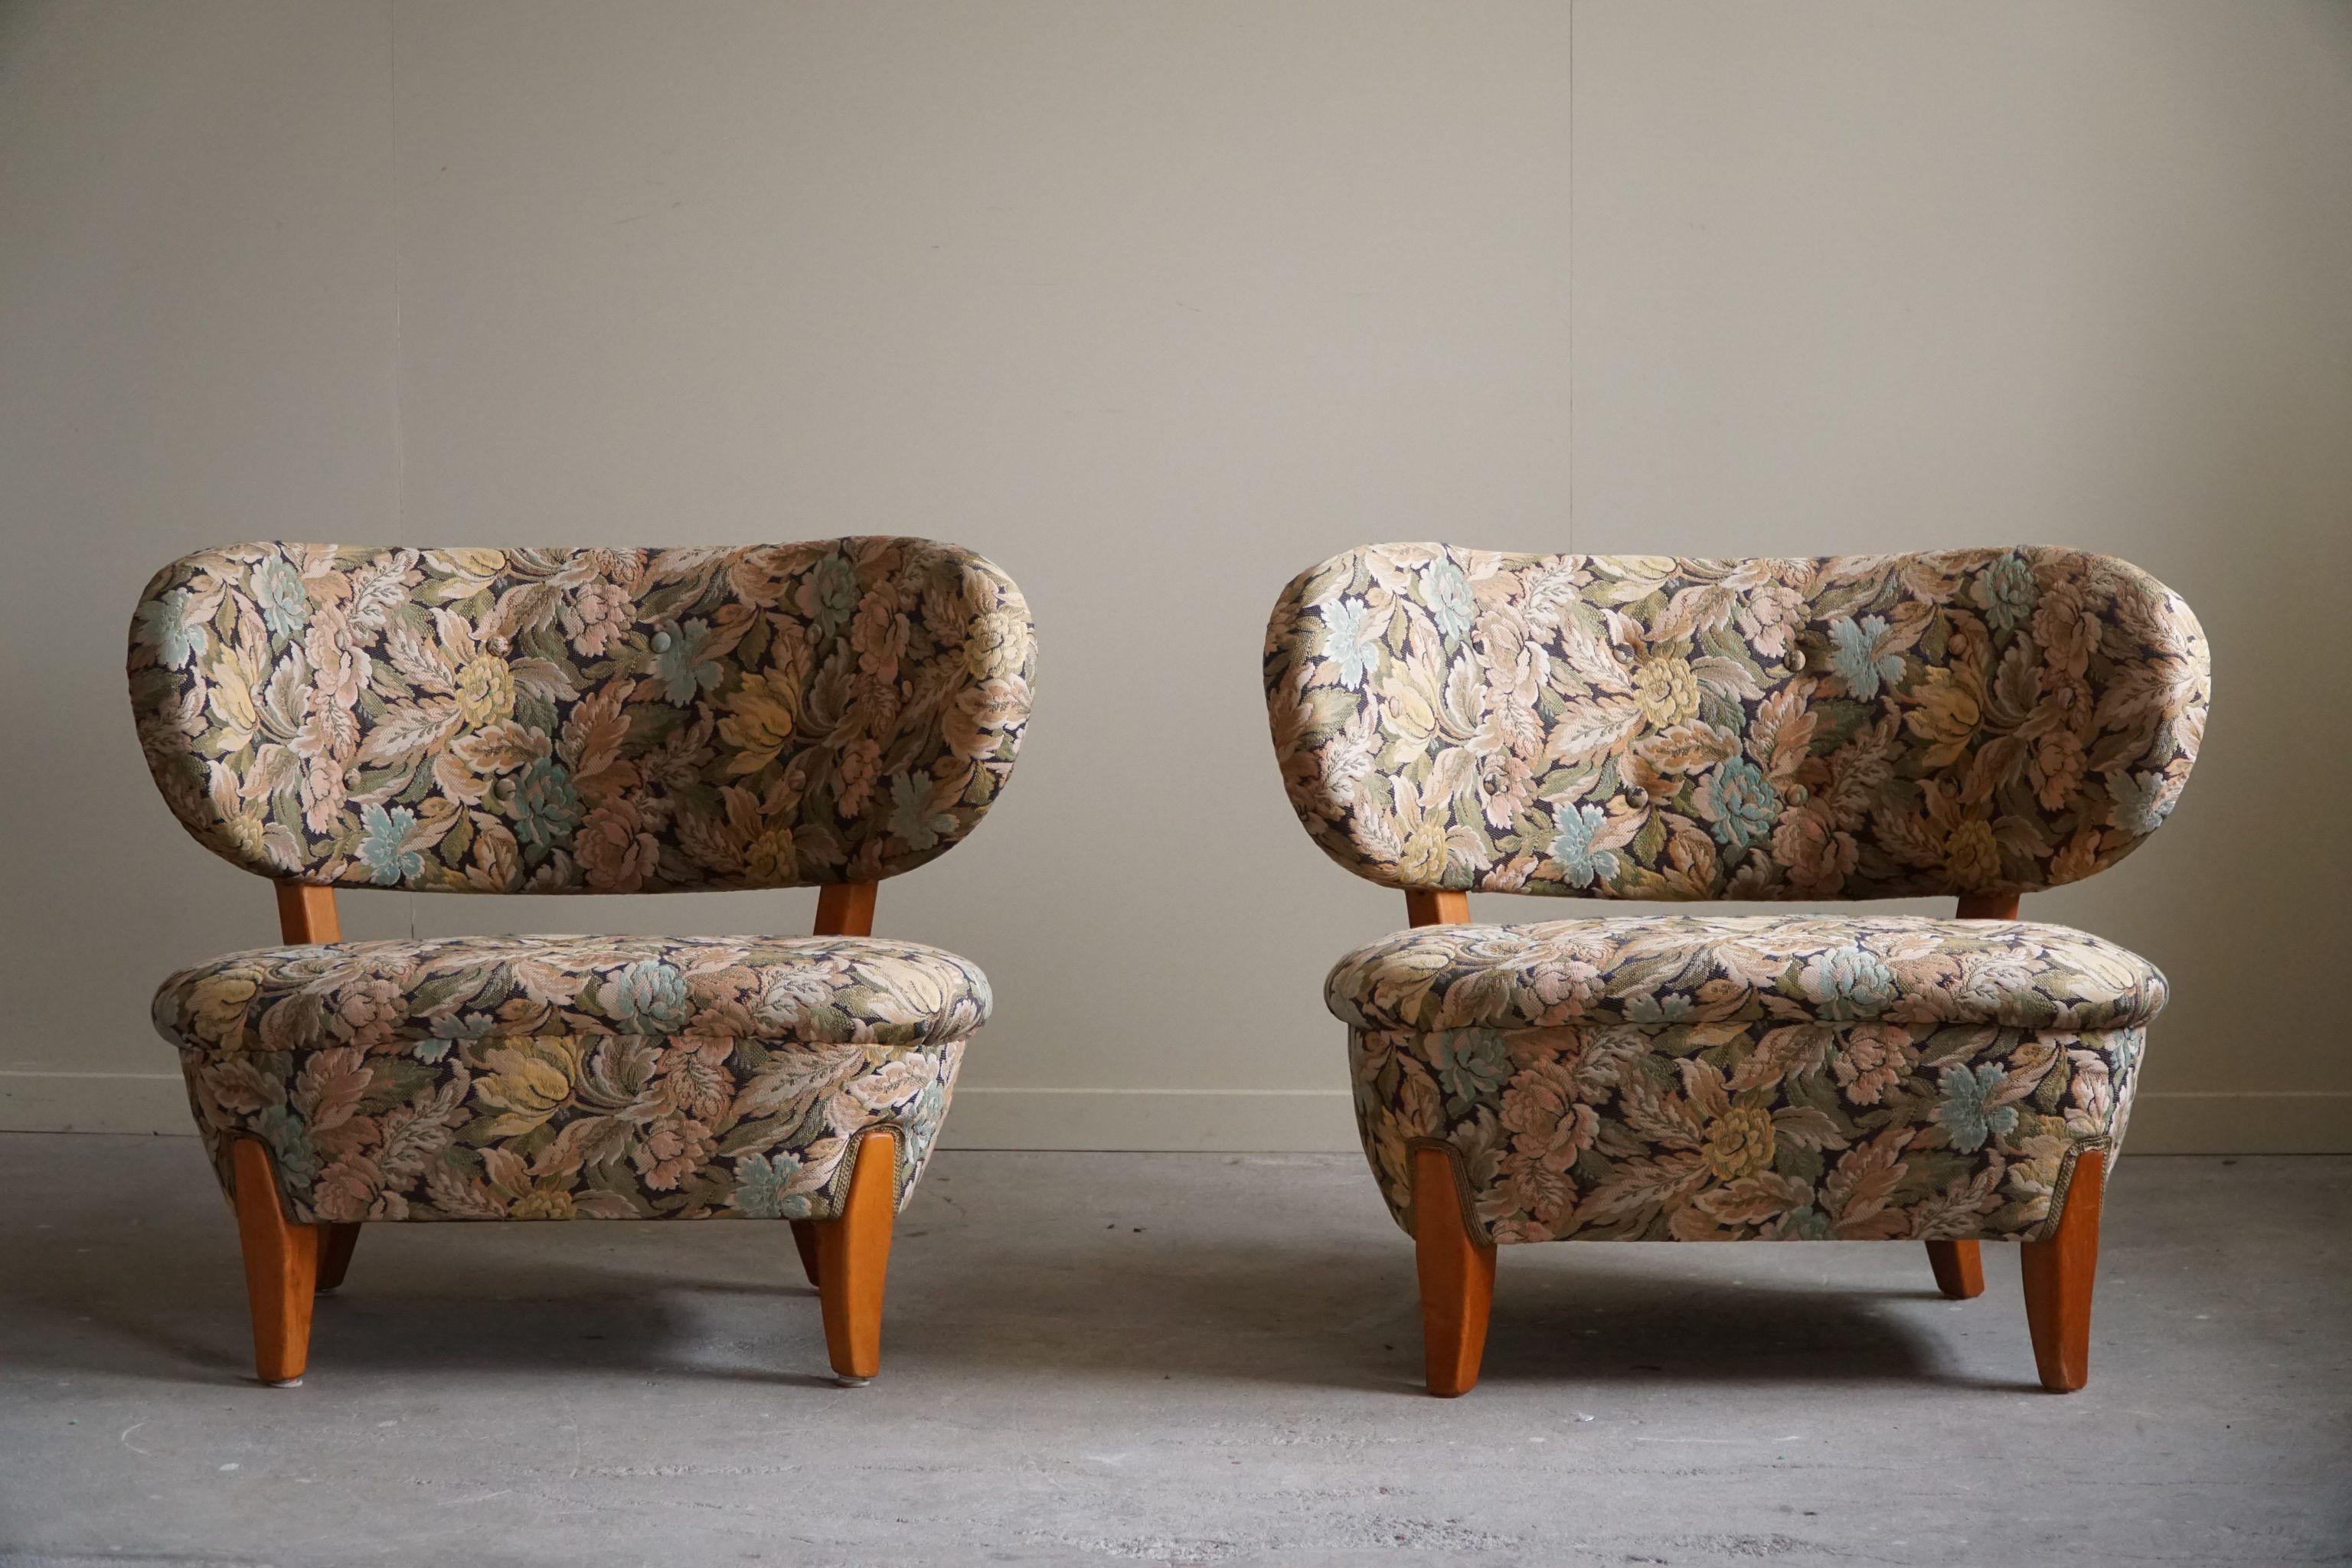 Otto Schulz, A Pair of Lounge Chairs, Jio Möbler, Swedish Modern, 1950s For Sale 12